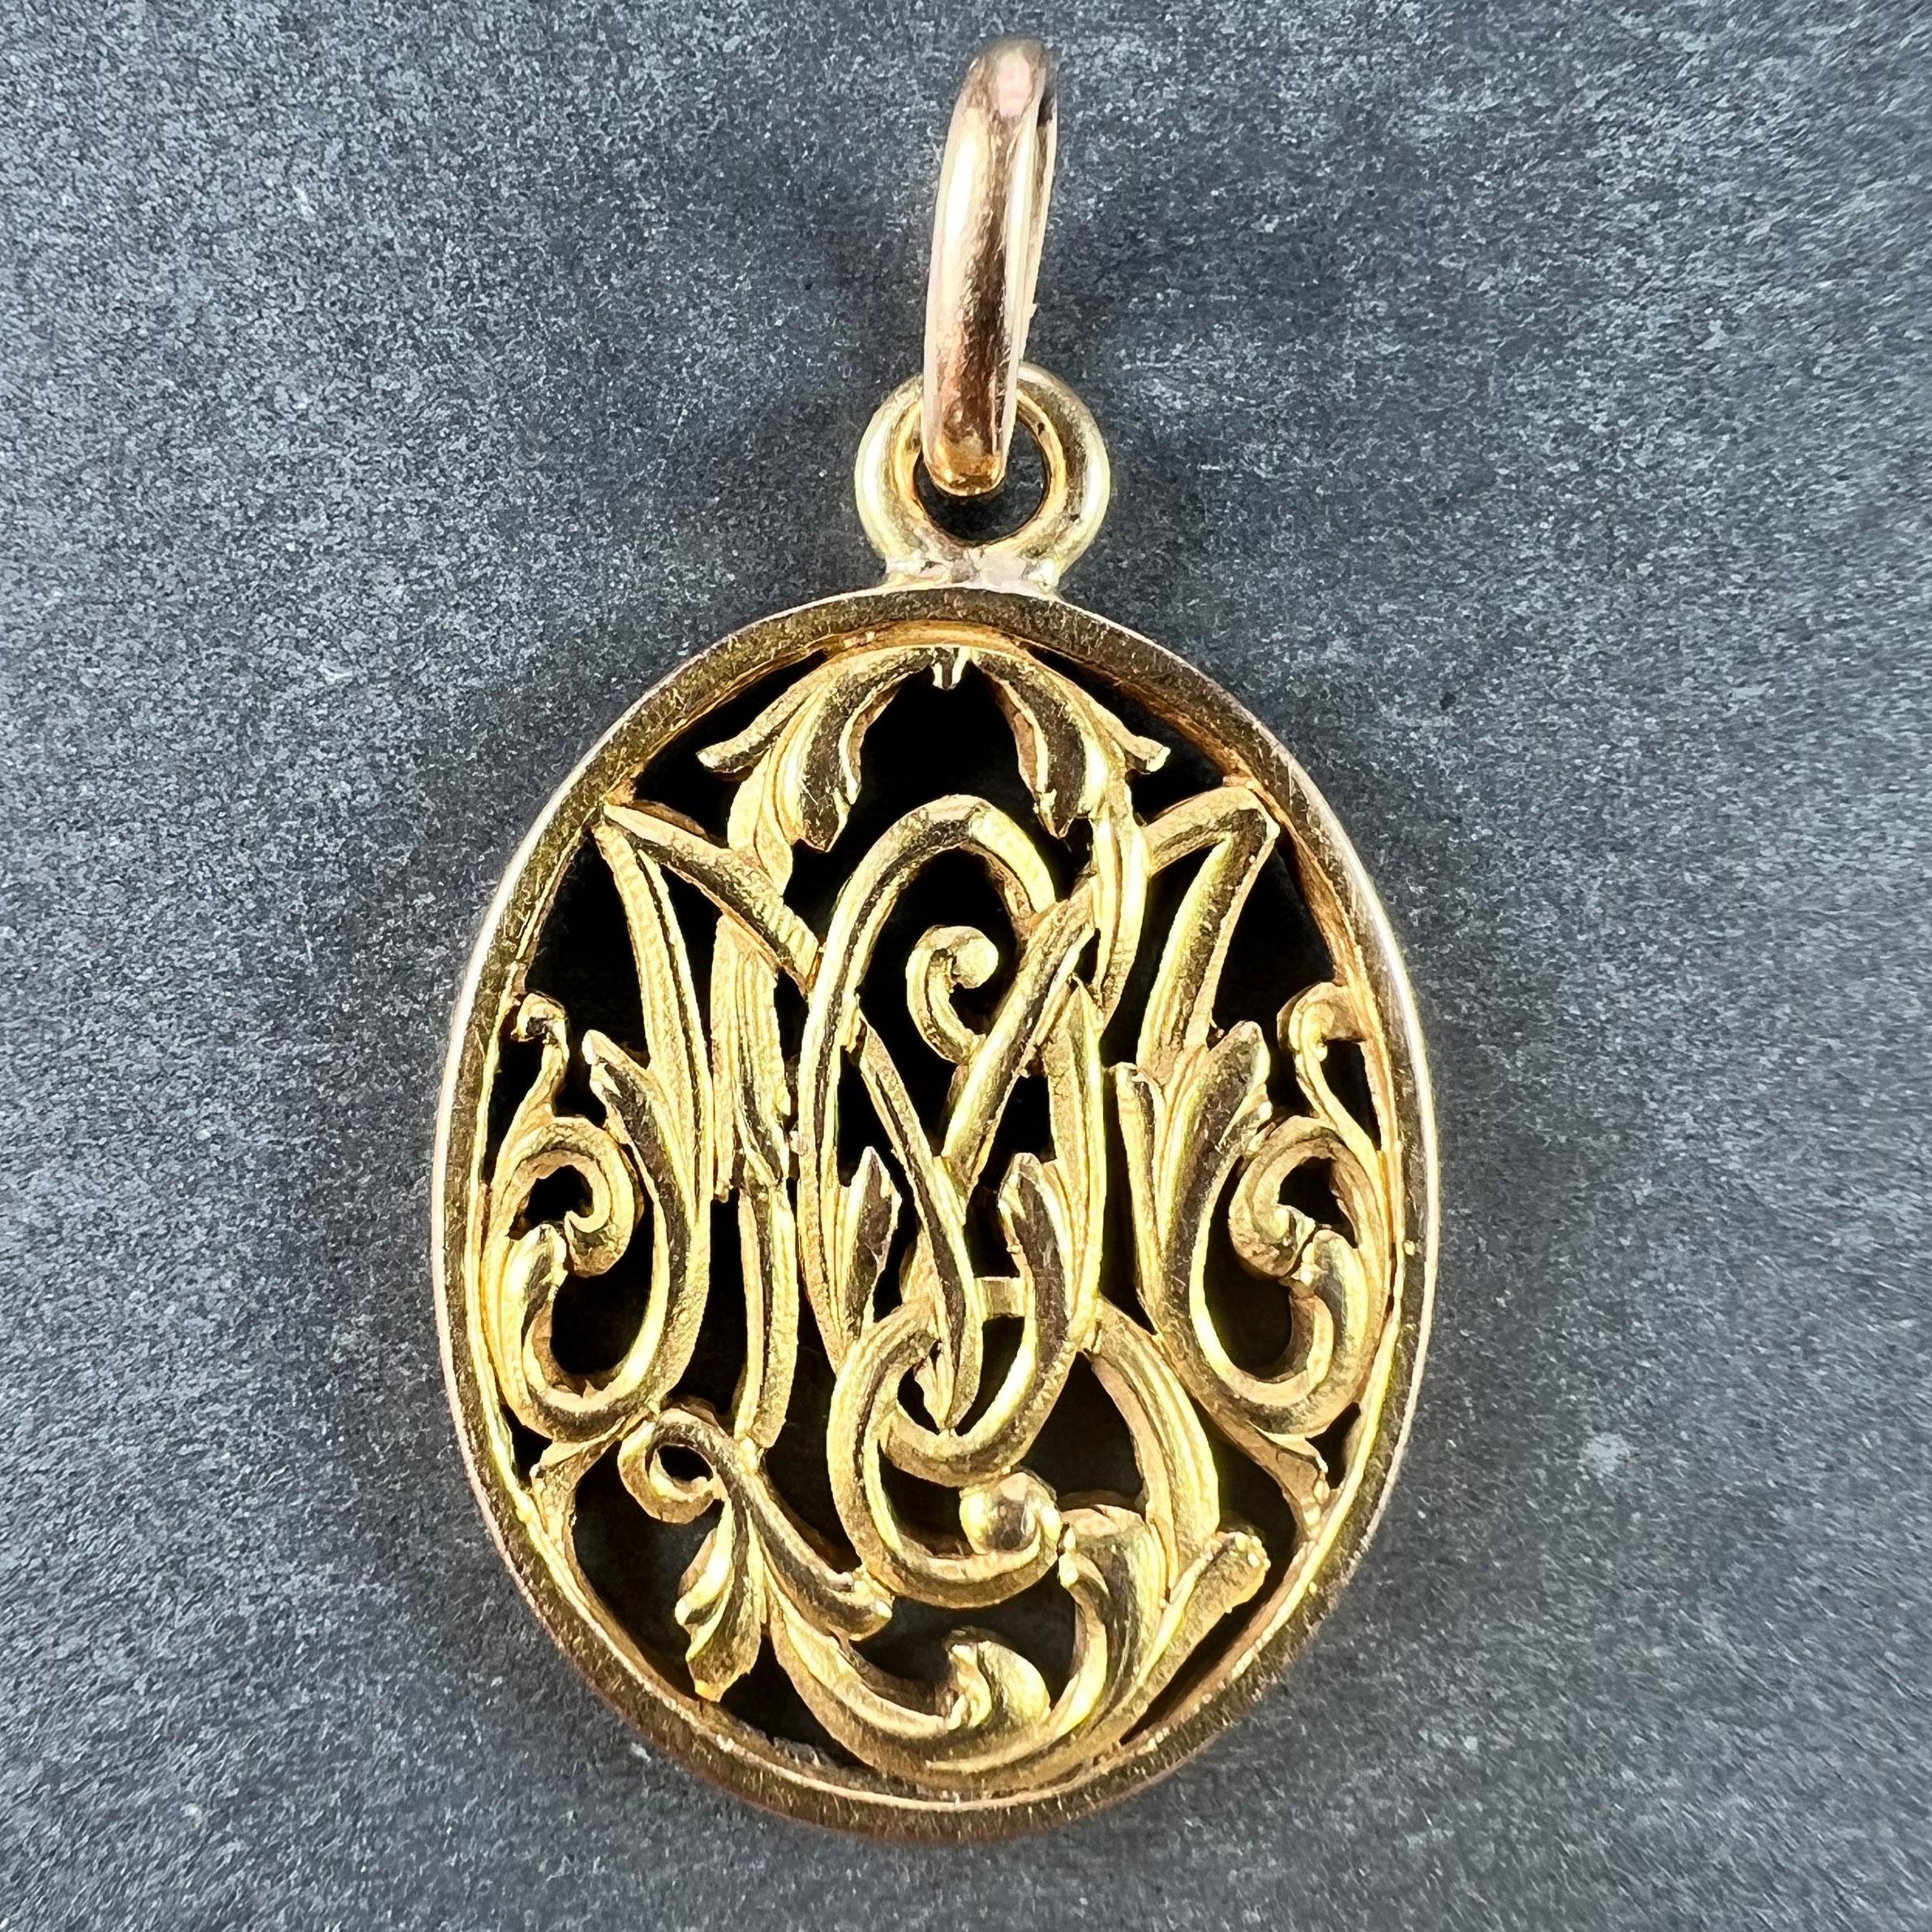 An antique French 18 karat (18K) yellow gold charm pendant designed as an oval pierced medal detailing the monogram OM or MO with the initials M and O intertwined and surrounded by curls and scrolls of engraved filigree work. Engraved to the